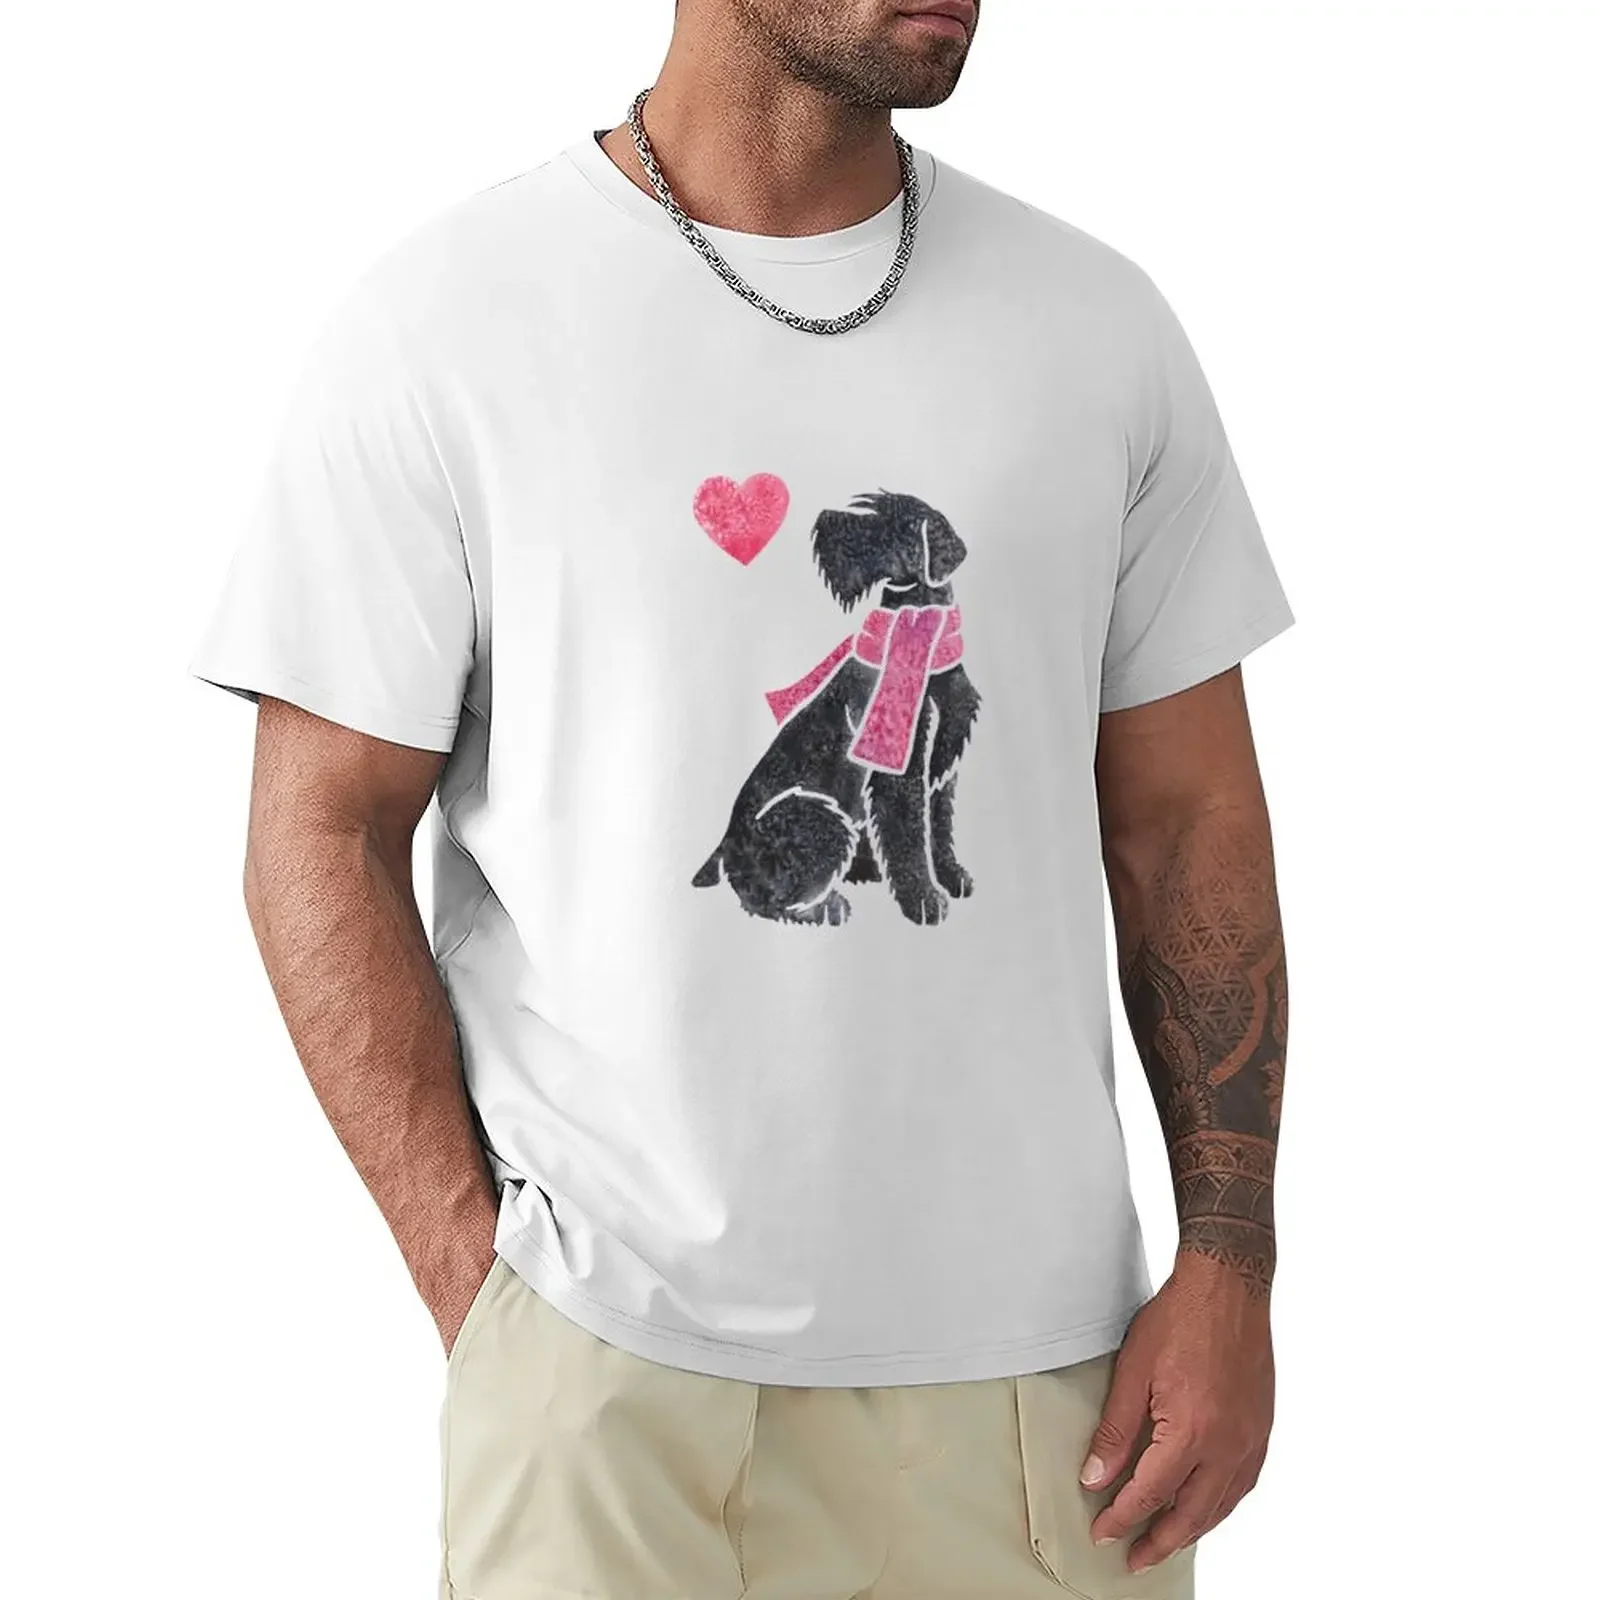 Watercolour Giant Schnauzer T-Shirt vintage anime mens white t shirts anime customs tops aesthetic clothes mens clothing summer kawaii oversized t shirt tie dye clothing vintage crop top anime tshirt for women white t shirts clothes manga clothes